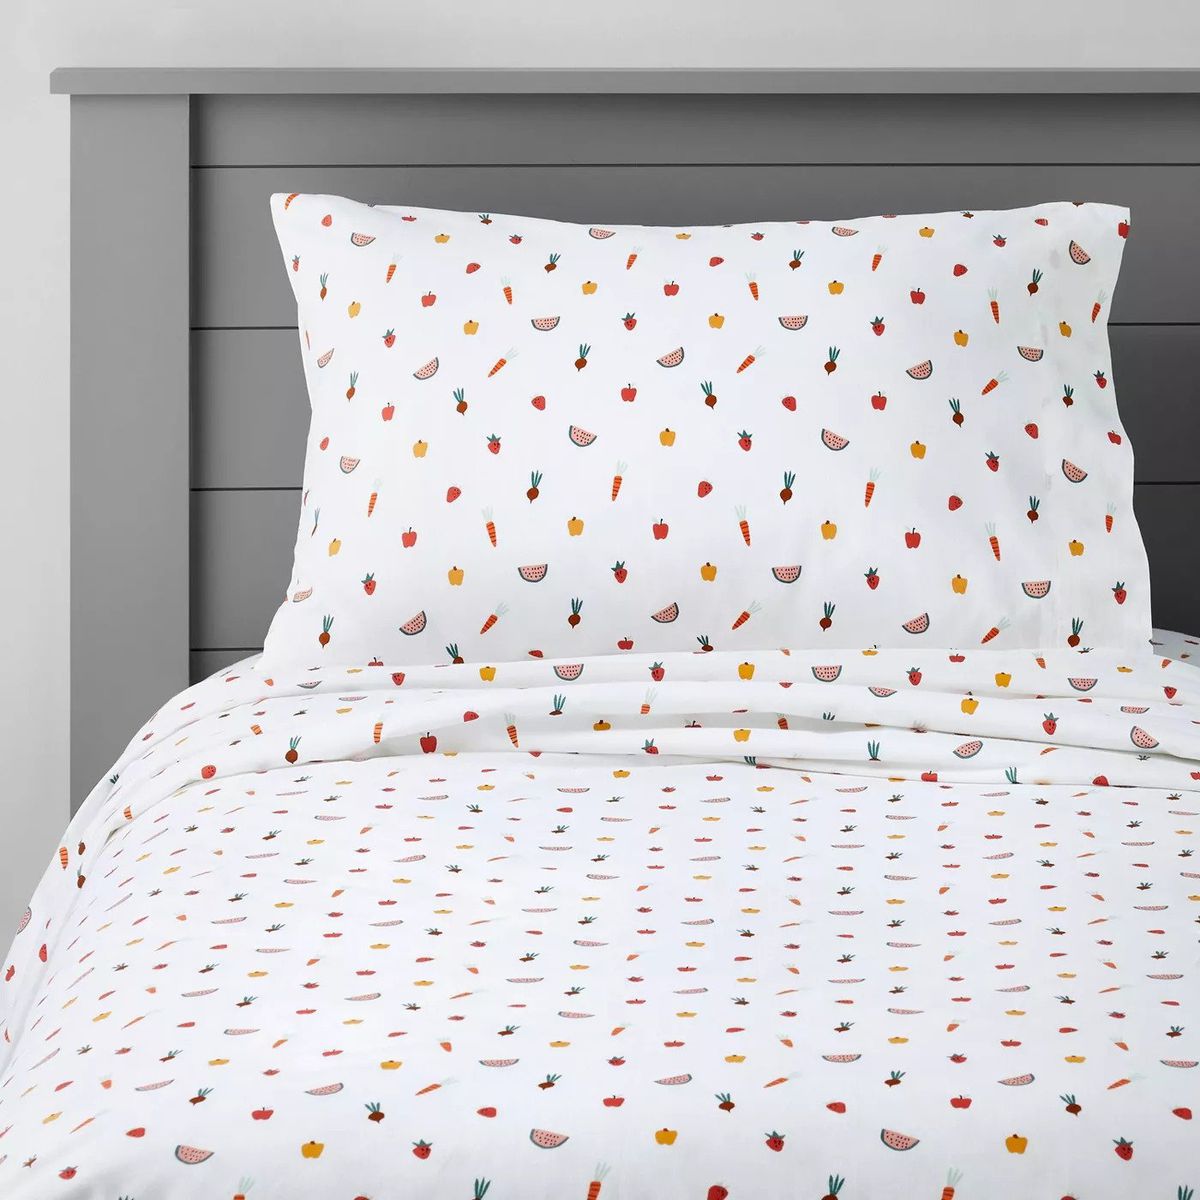 A bed made with sheets in a fruit pattern